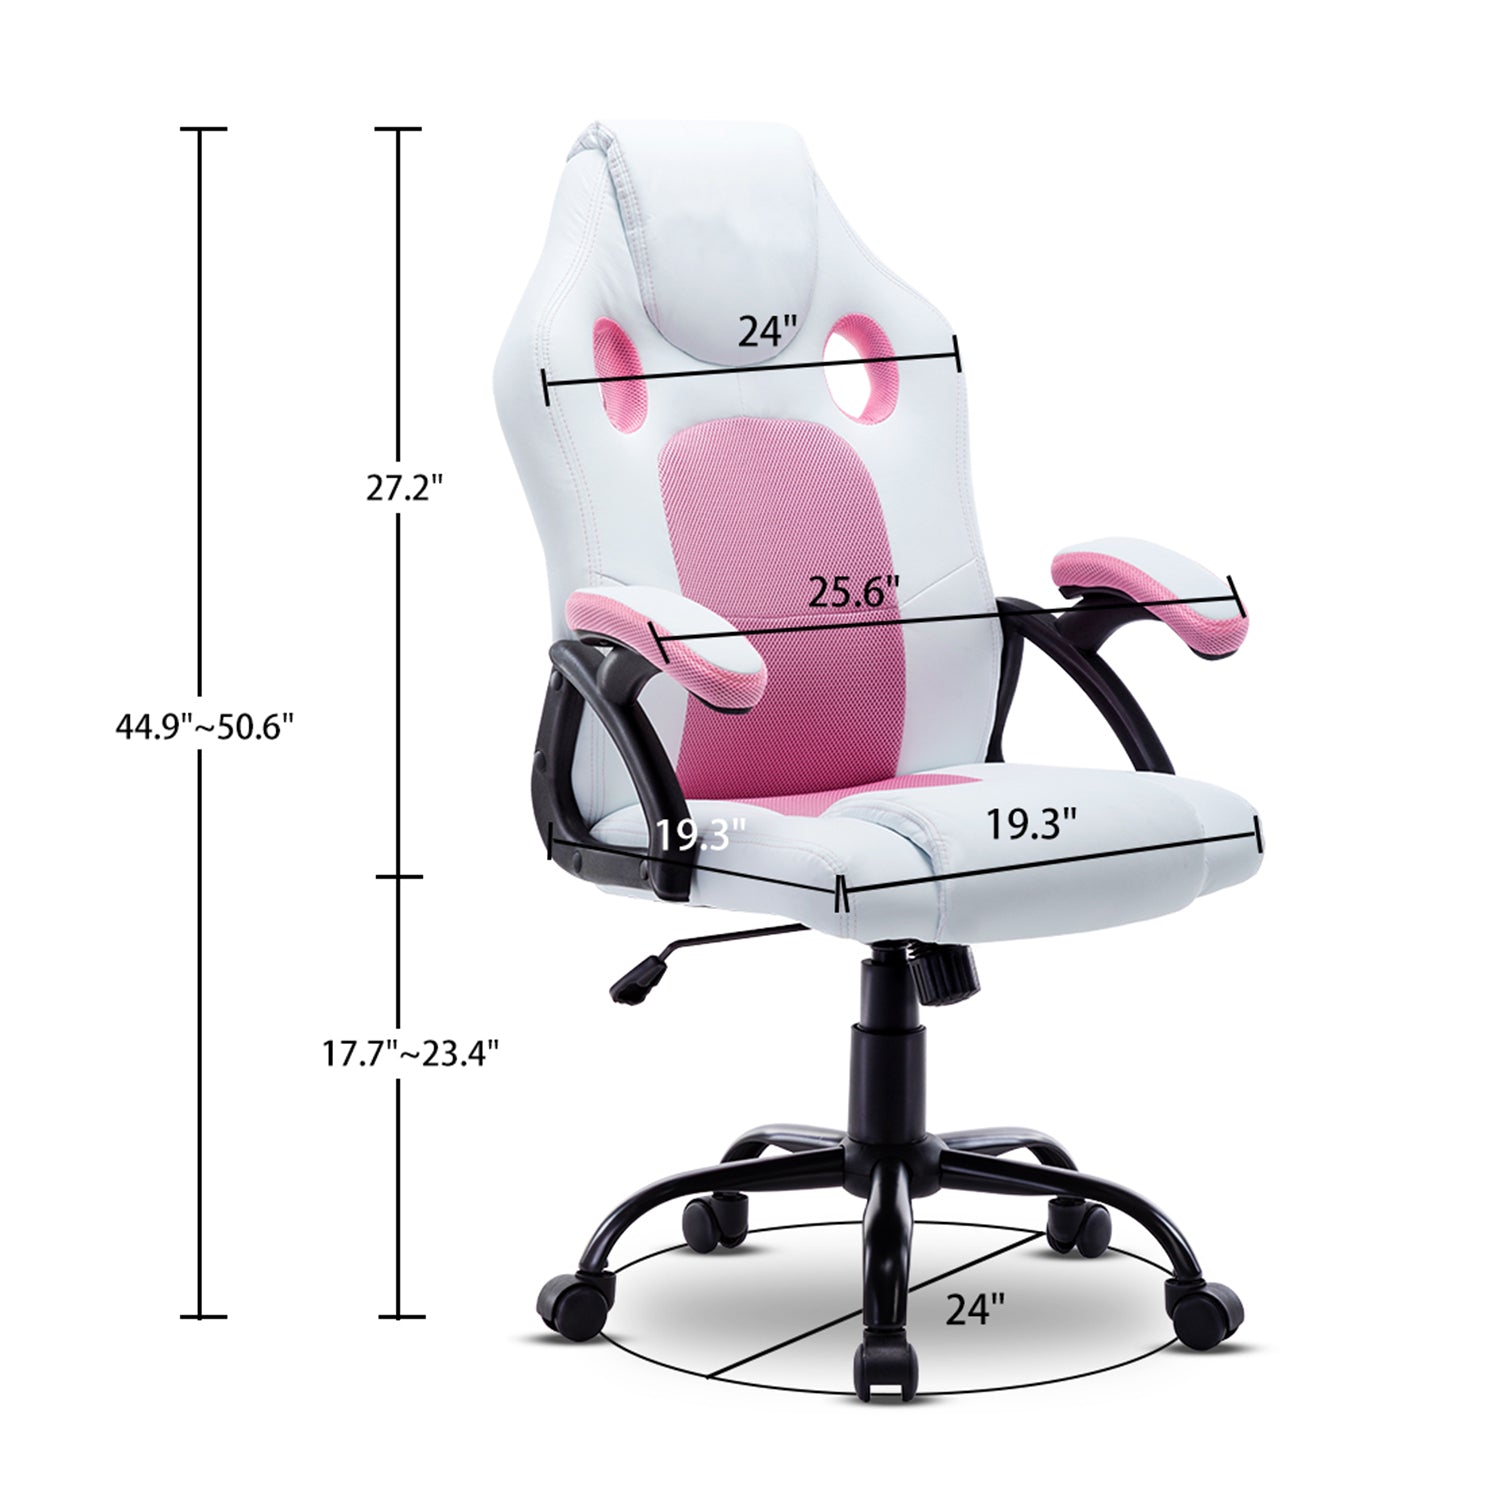 Gaming Chair-Ergonomic Racing Office Computer Game Chair-Swivel Rocker E-Sports Chair with Adjustable Backrest and Seat Height (Pink+White)